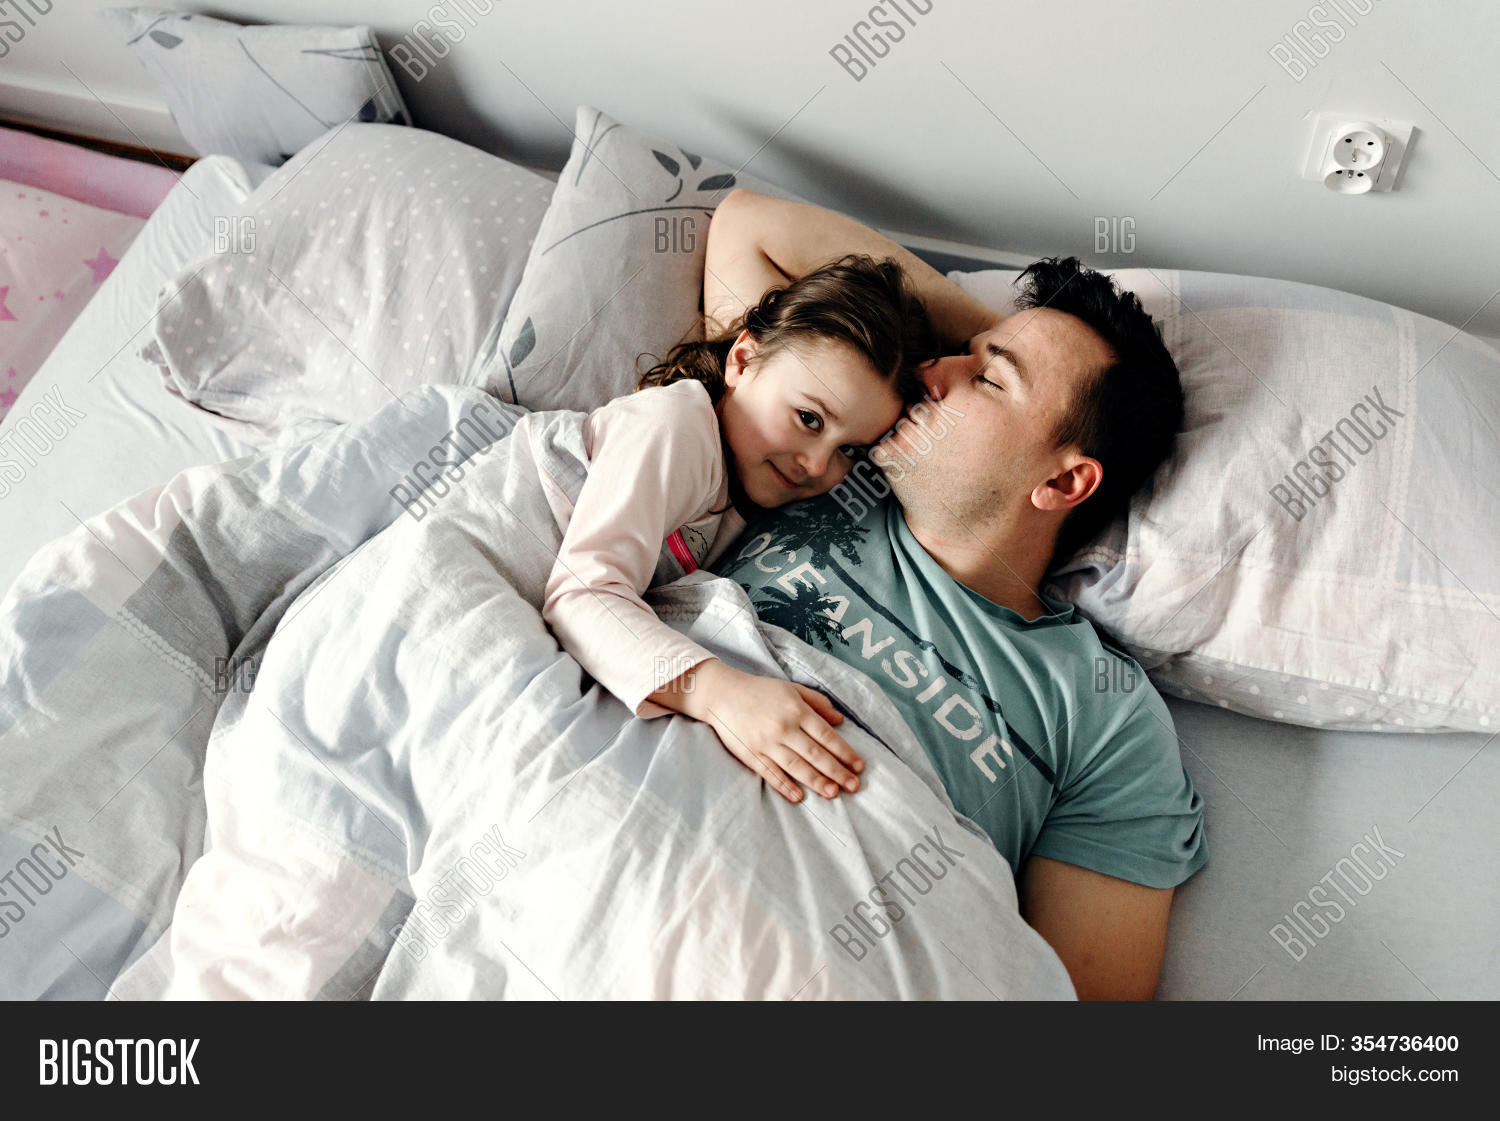 amy ussery add photo dad and daughter sleeping